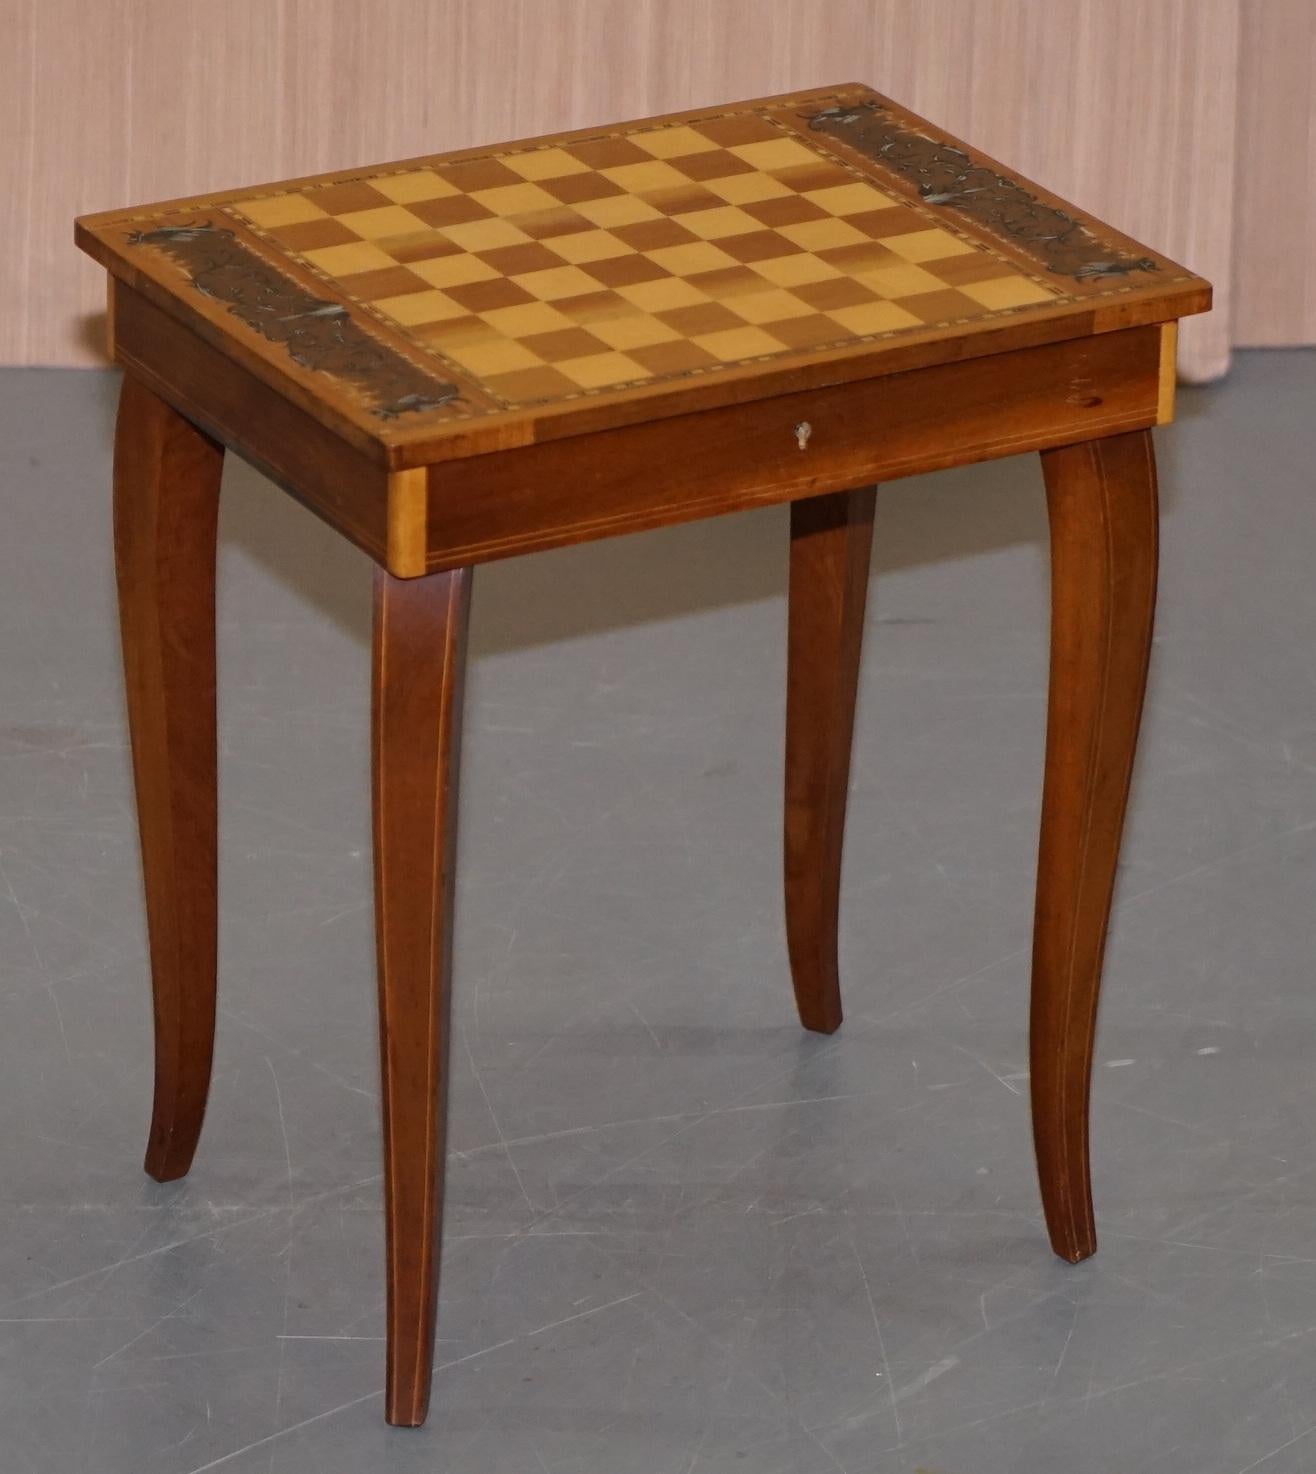 We are delighted to offer for sale this lovely little musical chess backgammon games table with original pieces

A good looking side table, very decorative, you have a full size drawer for storing games pieces in and of course the little music box